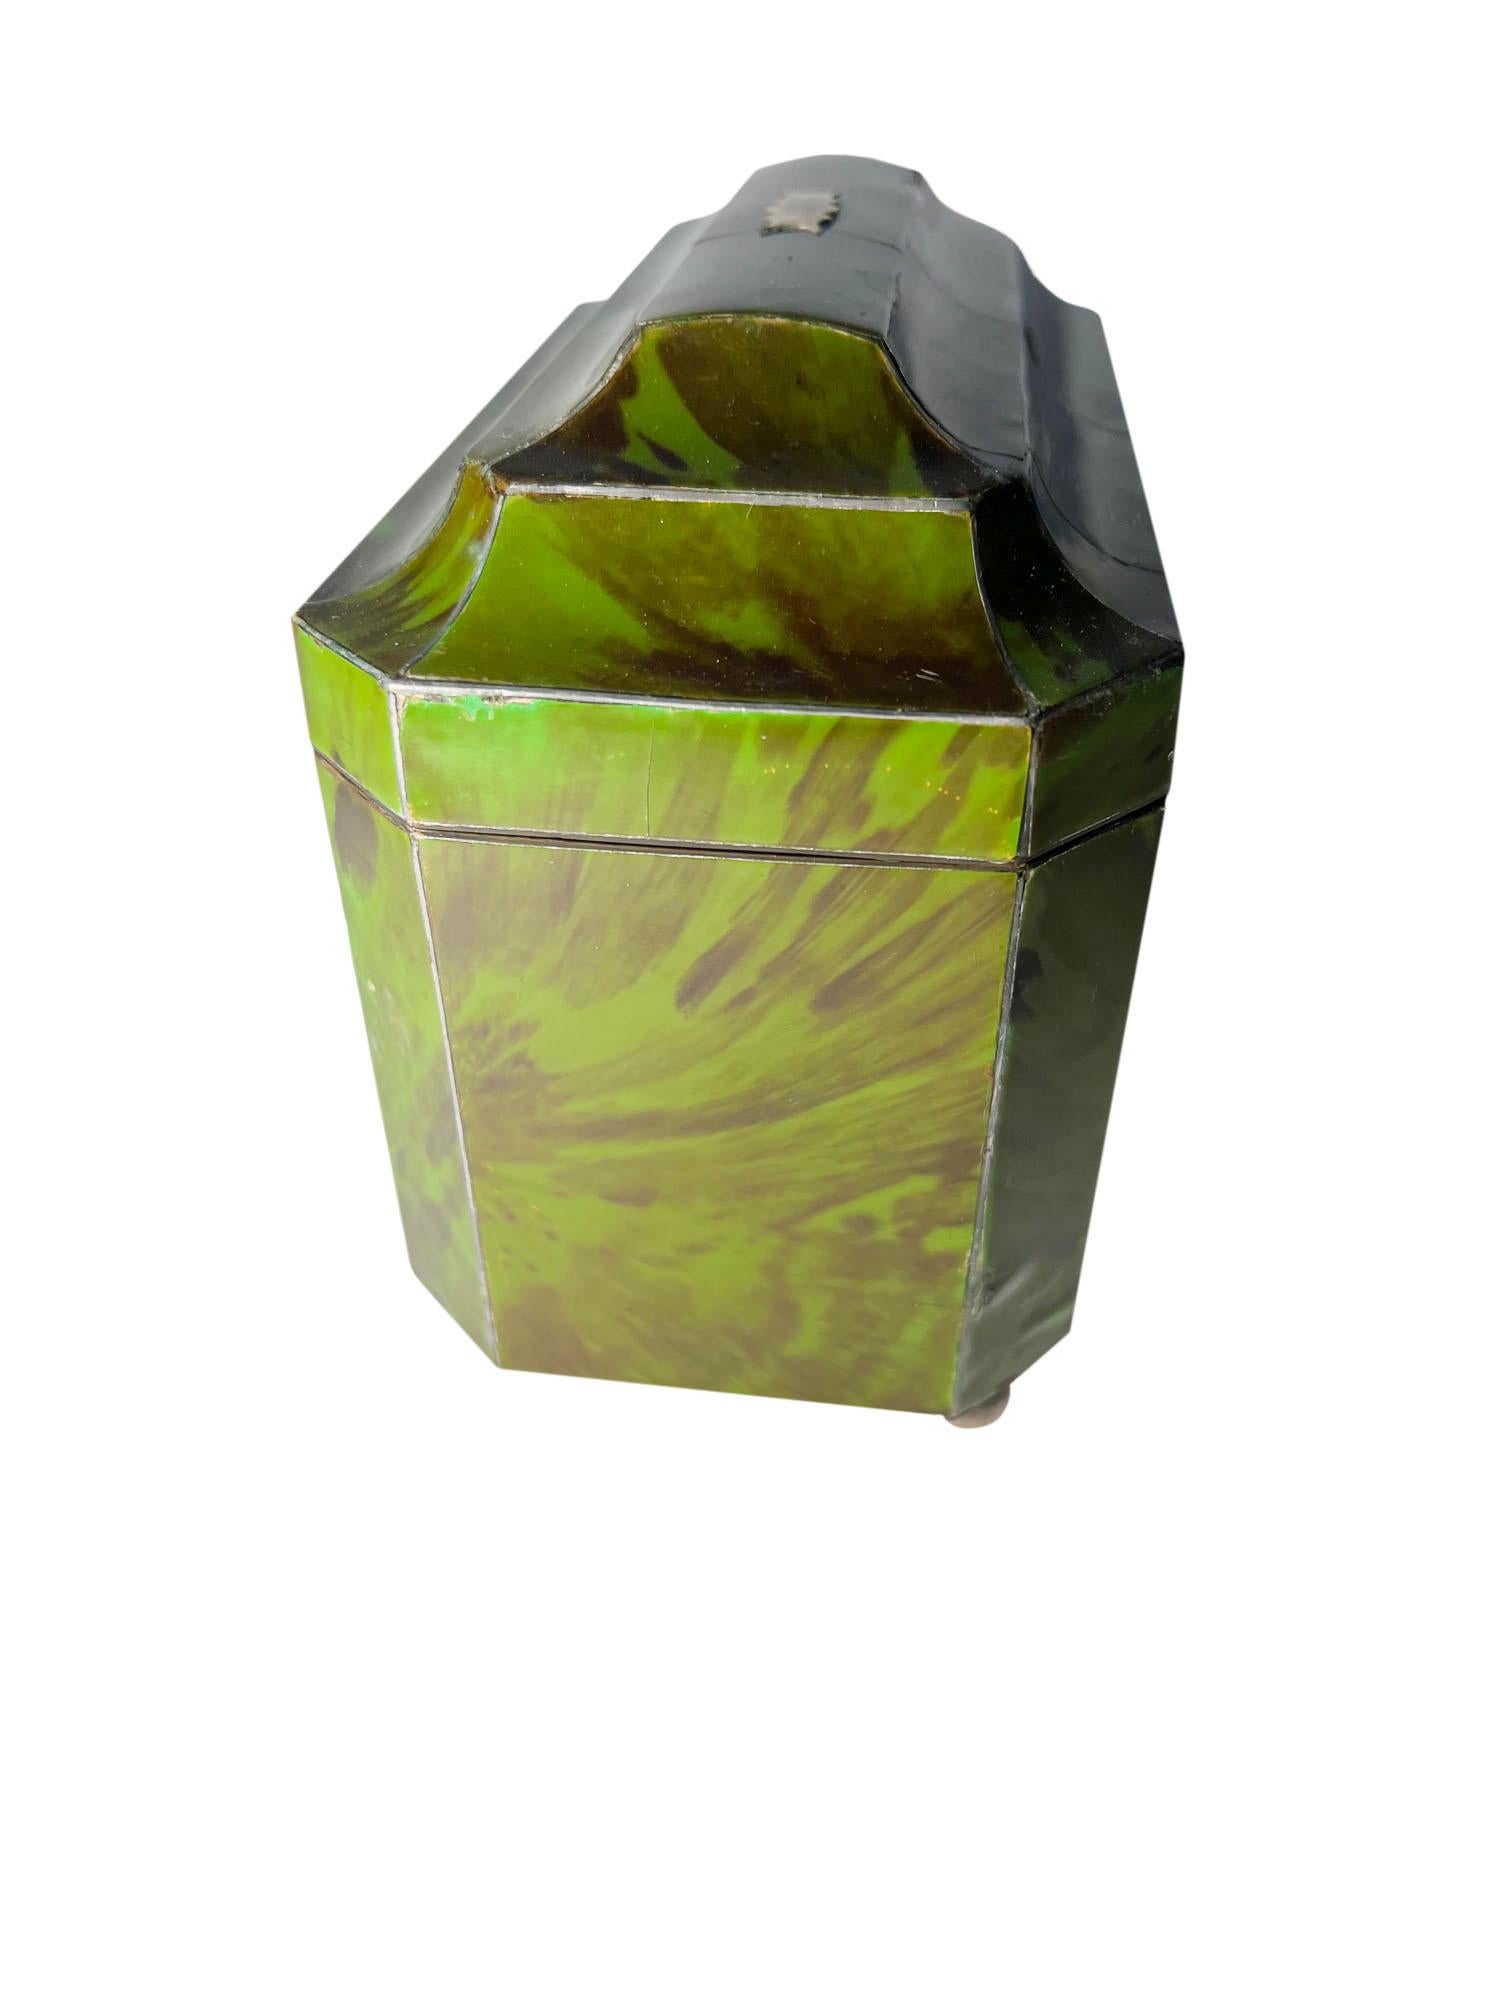 Green Tortoiseshell Tea Caddy In Good Condition For Sale In Dallas, TX